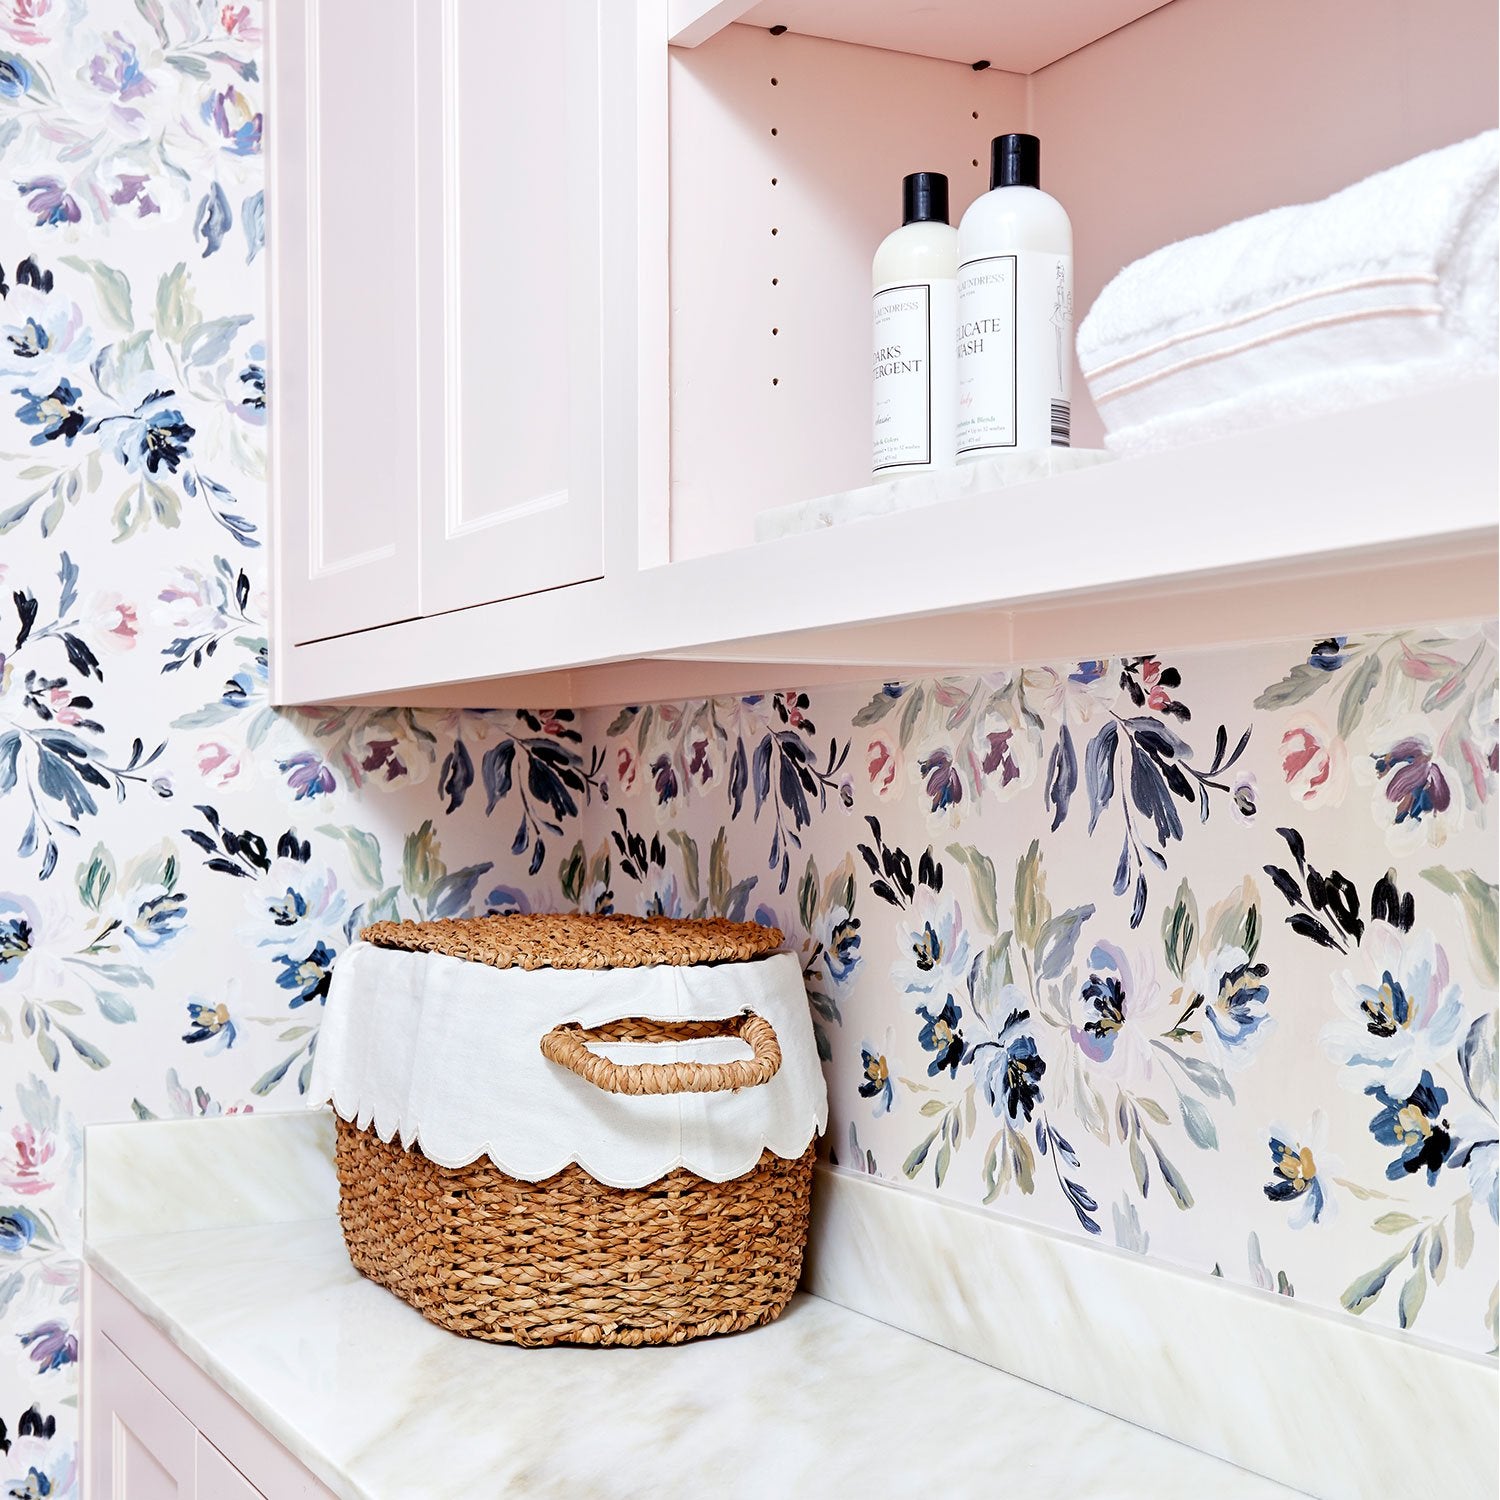 Vienna Floral Laundry Room Wallpaper